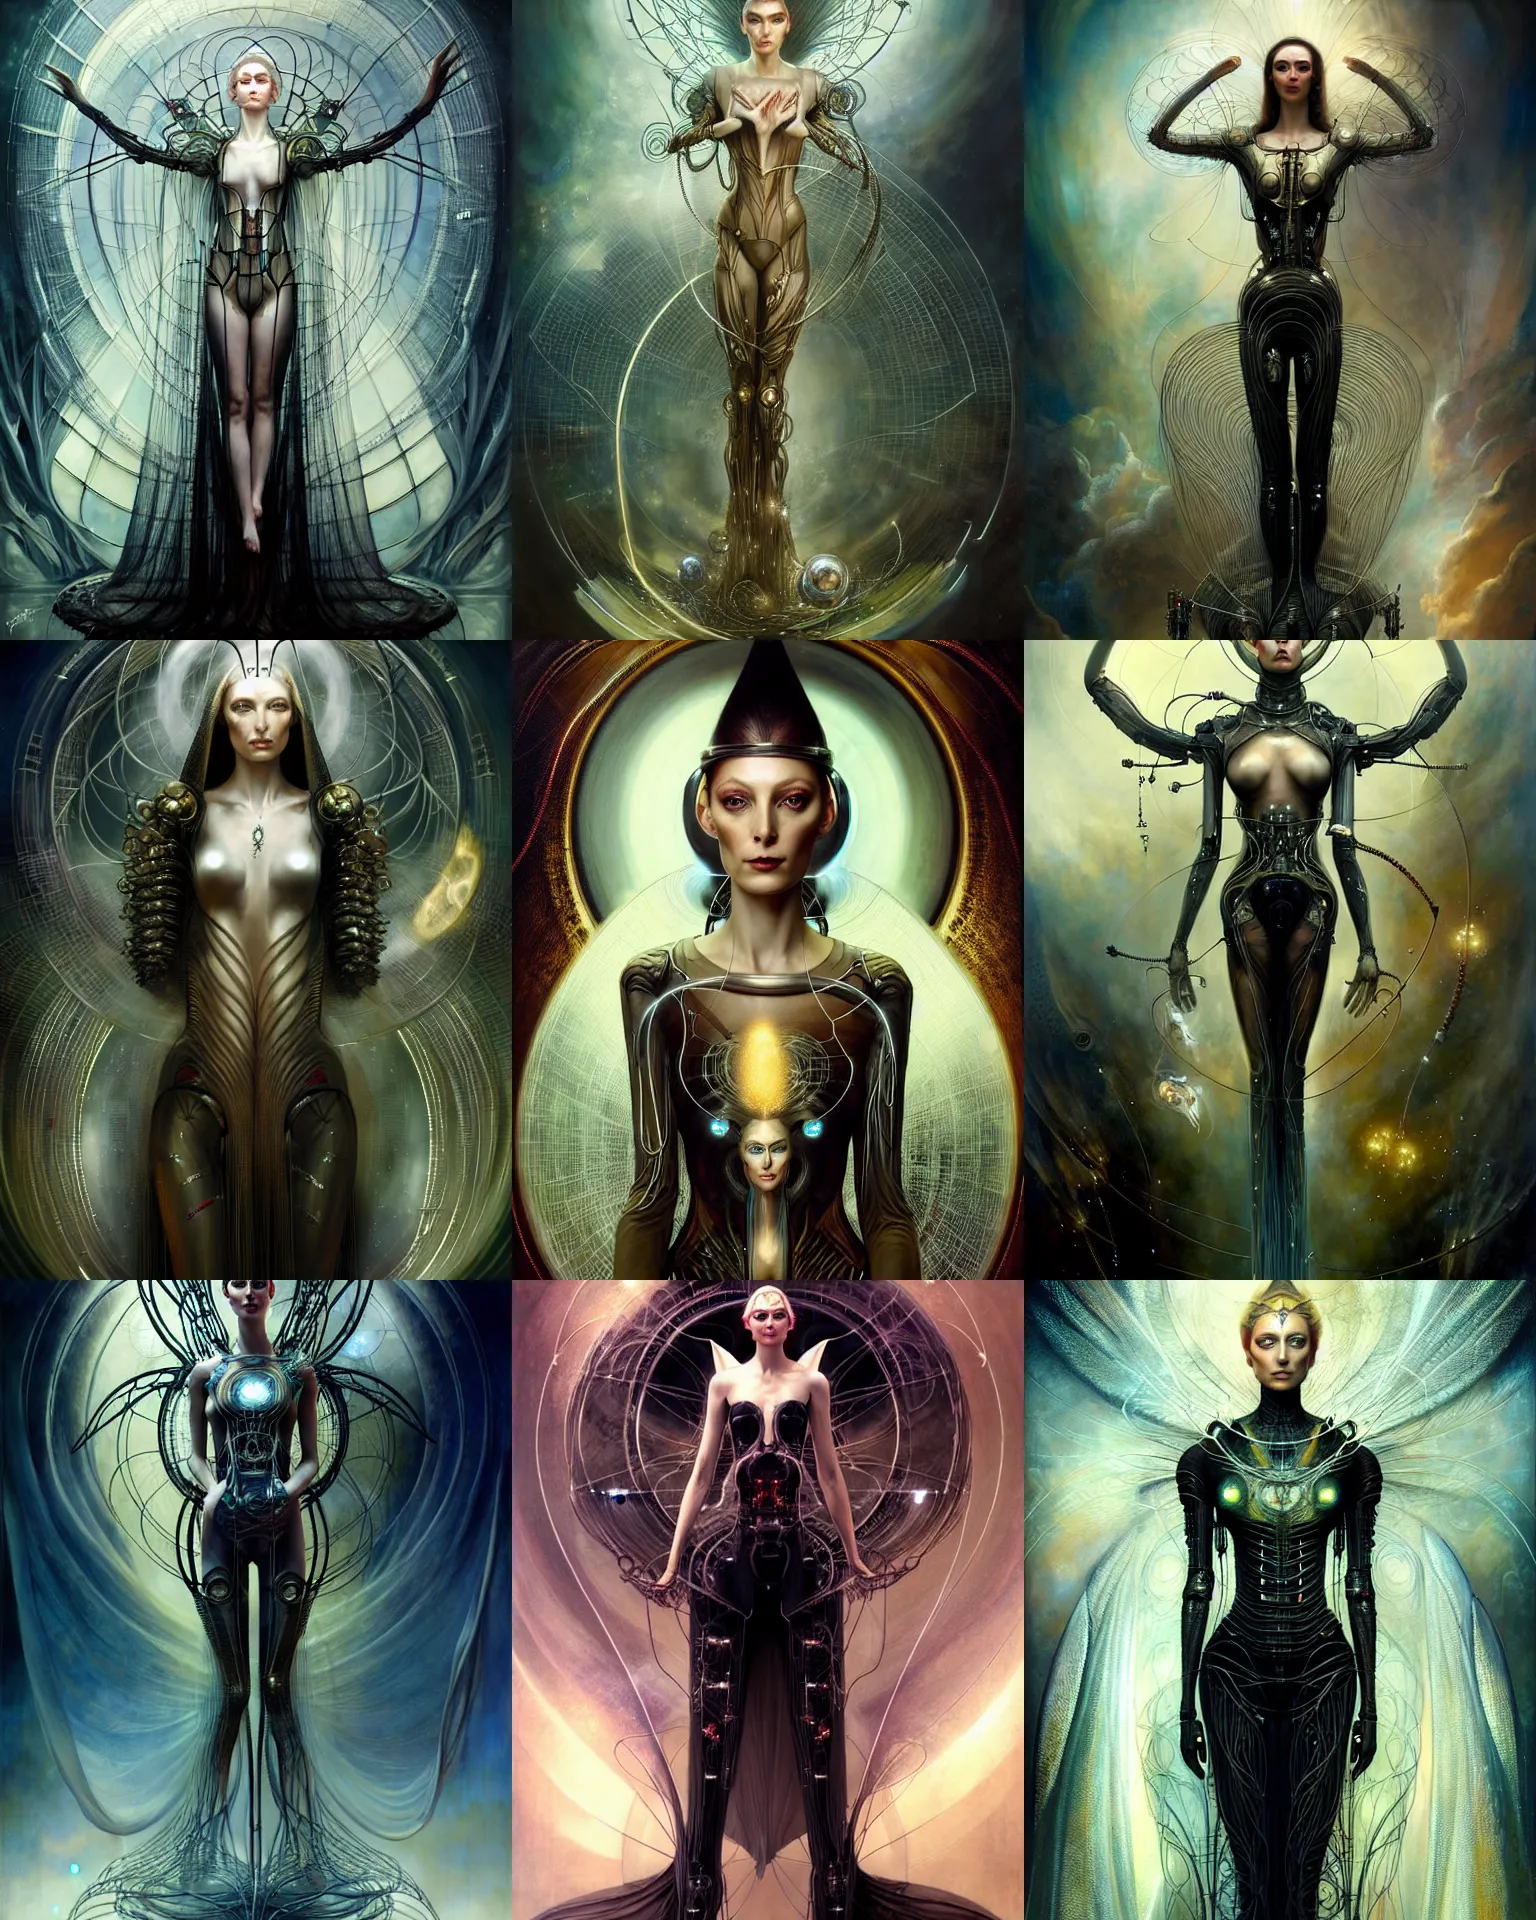 Prompt: karol bak and tom bagshaw and bastien lecouffe - deharme full body character portrait of galadriel as the borg queen, floating in a powerful zen state, supermodel, beautiful and ominous, wearing combination of mecha and bodysuit made of wires and silk, machinery enveloping nature in the background, scifi character render